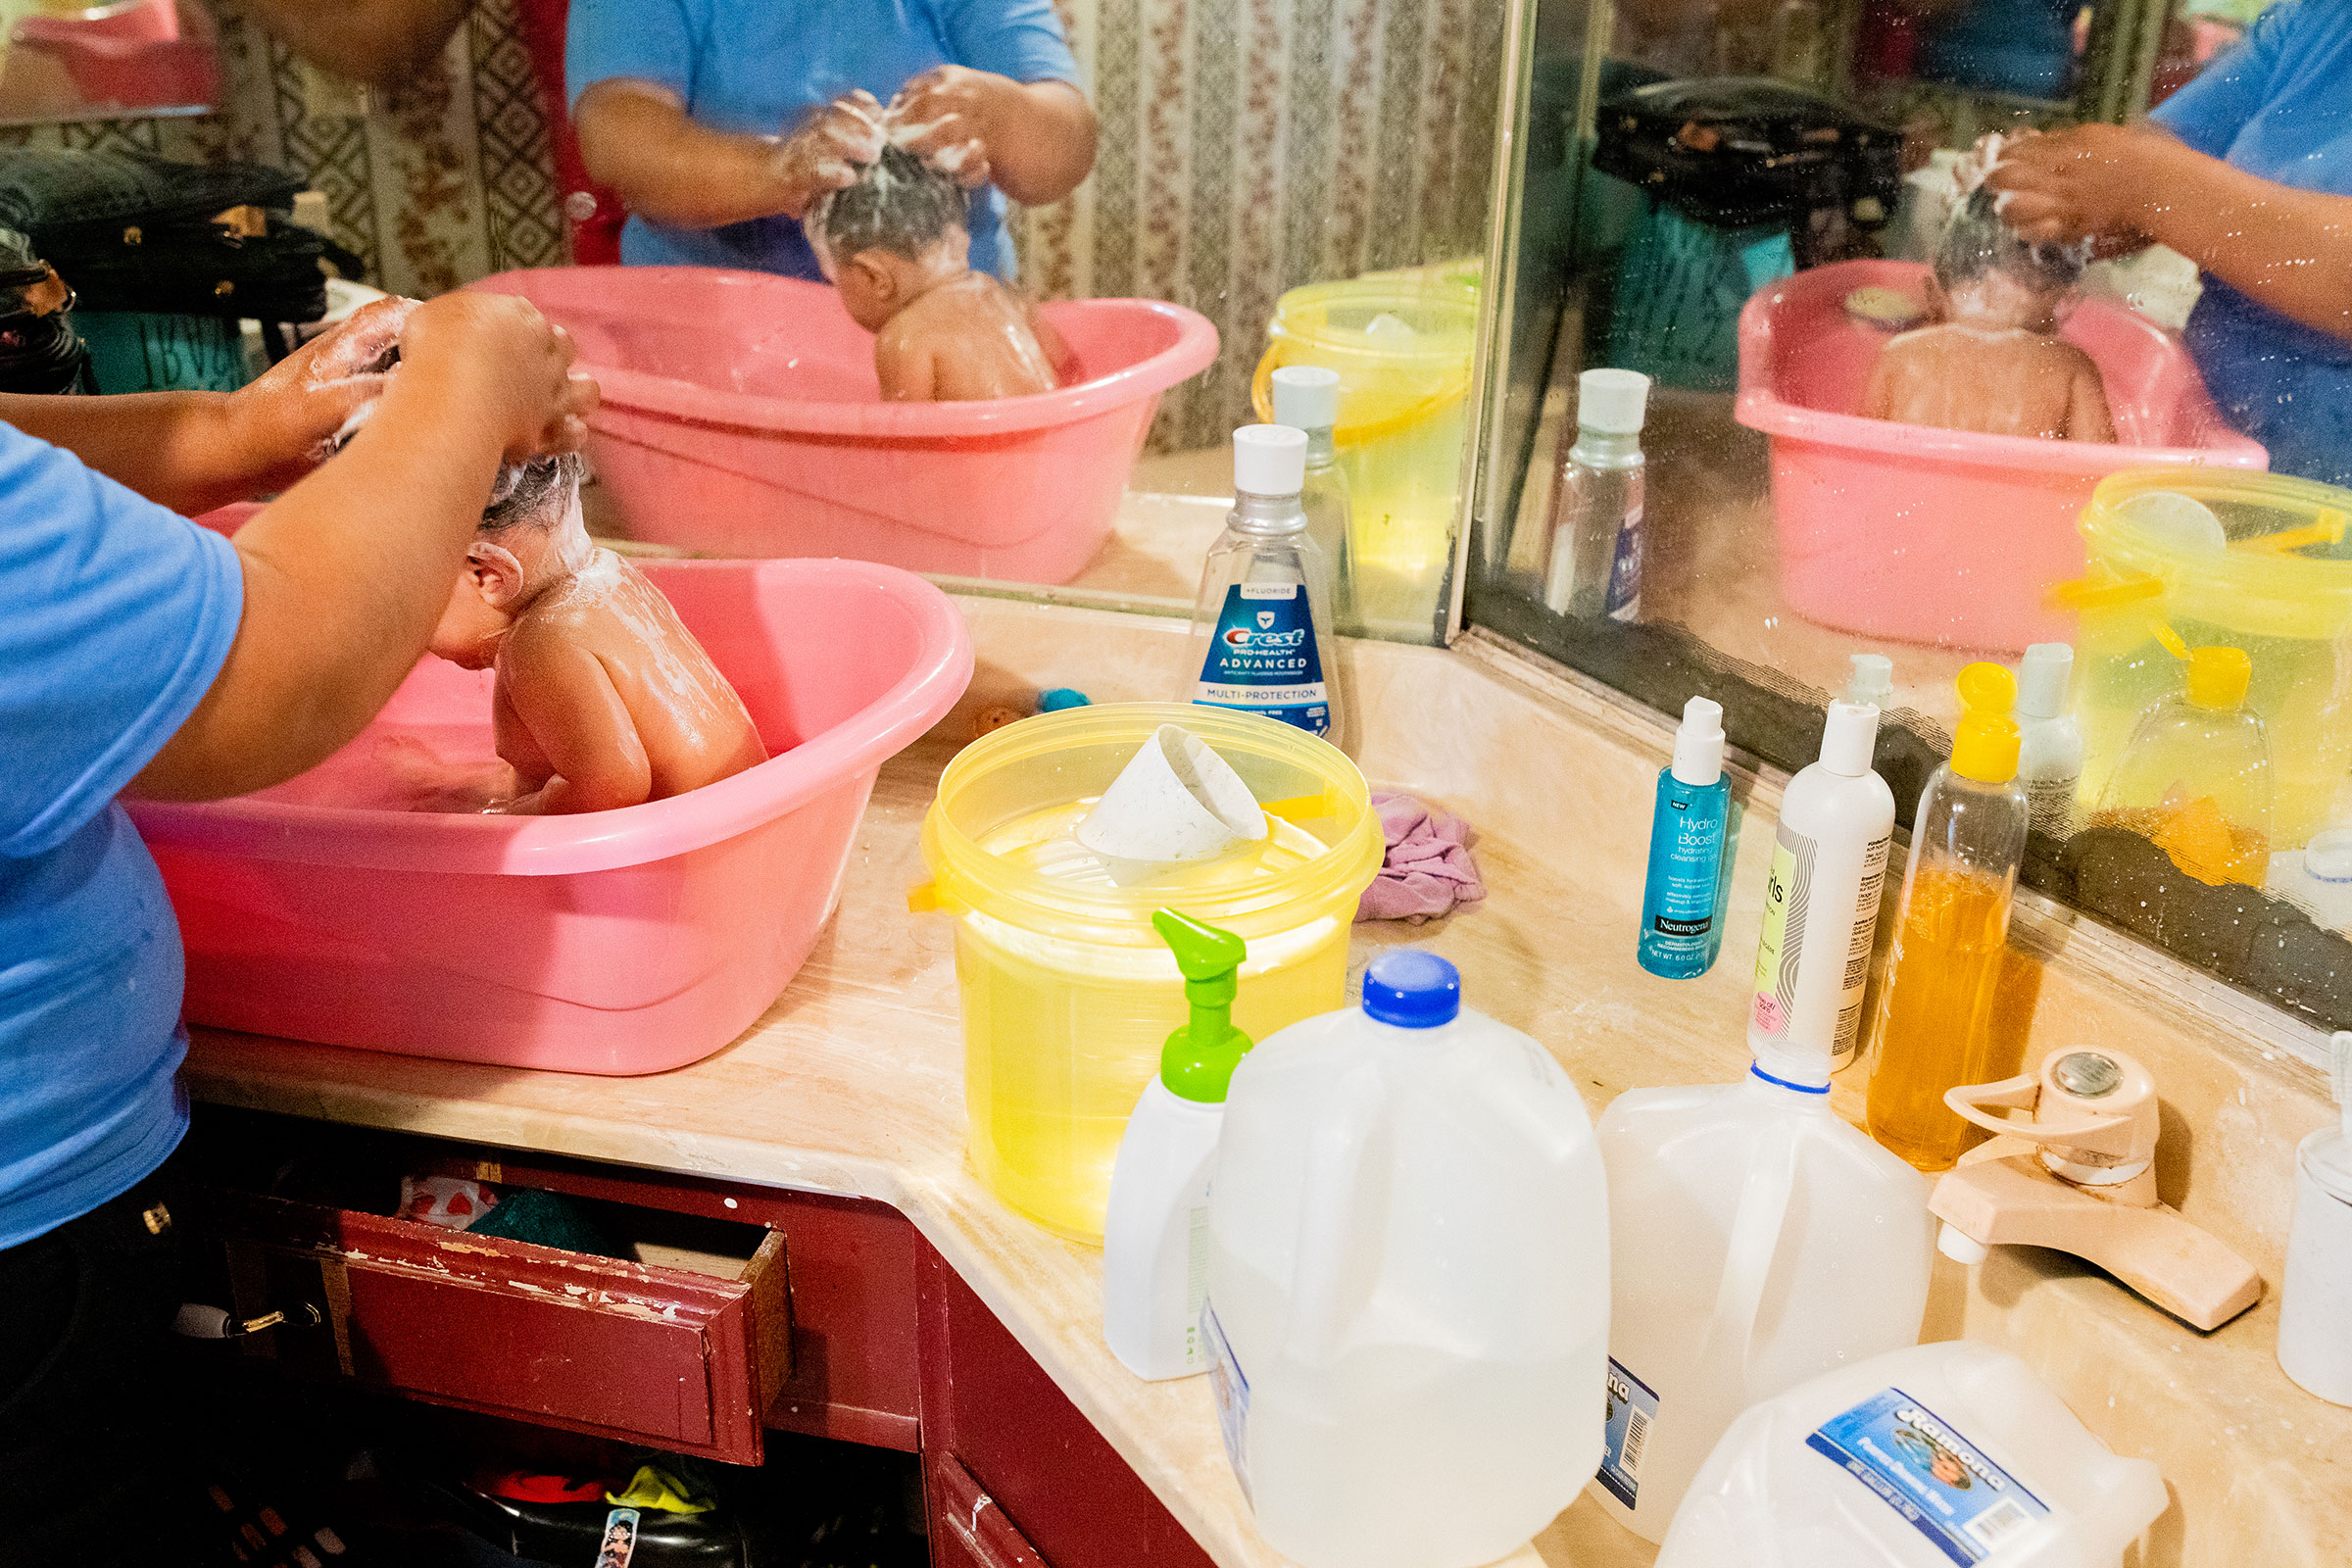 Cecilia Cruz bathes her daughter Daleyda with bottled water that she preheated beforehand inside the family’s trailer at the Oasis Mobile Home Park in Thermal, Calif. on June 25. In 2019 the Environmental Protection Agency found that the park’s water was contaminated with arsenic at nearly 10 times the allowable limit and residents have since been warned not to use it for drinking, cooking, bathing, or brushing their teeth. (Alex Welsh for The New York Times)